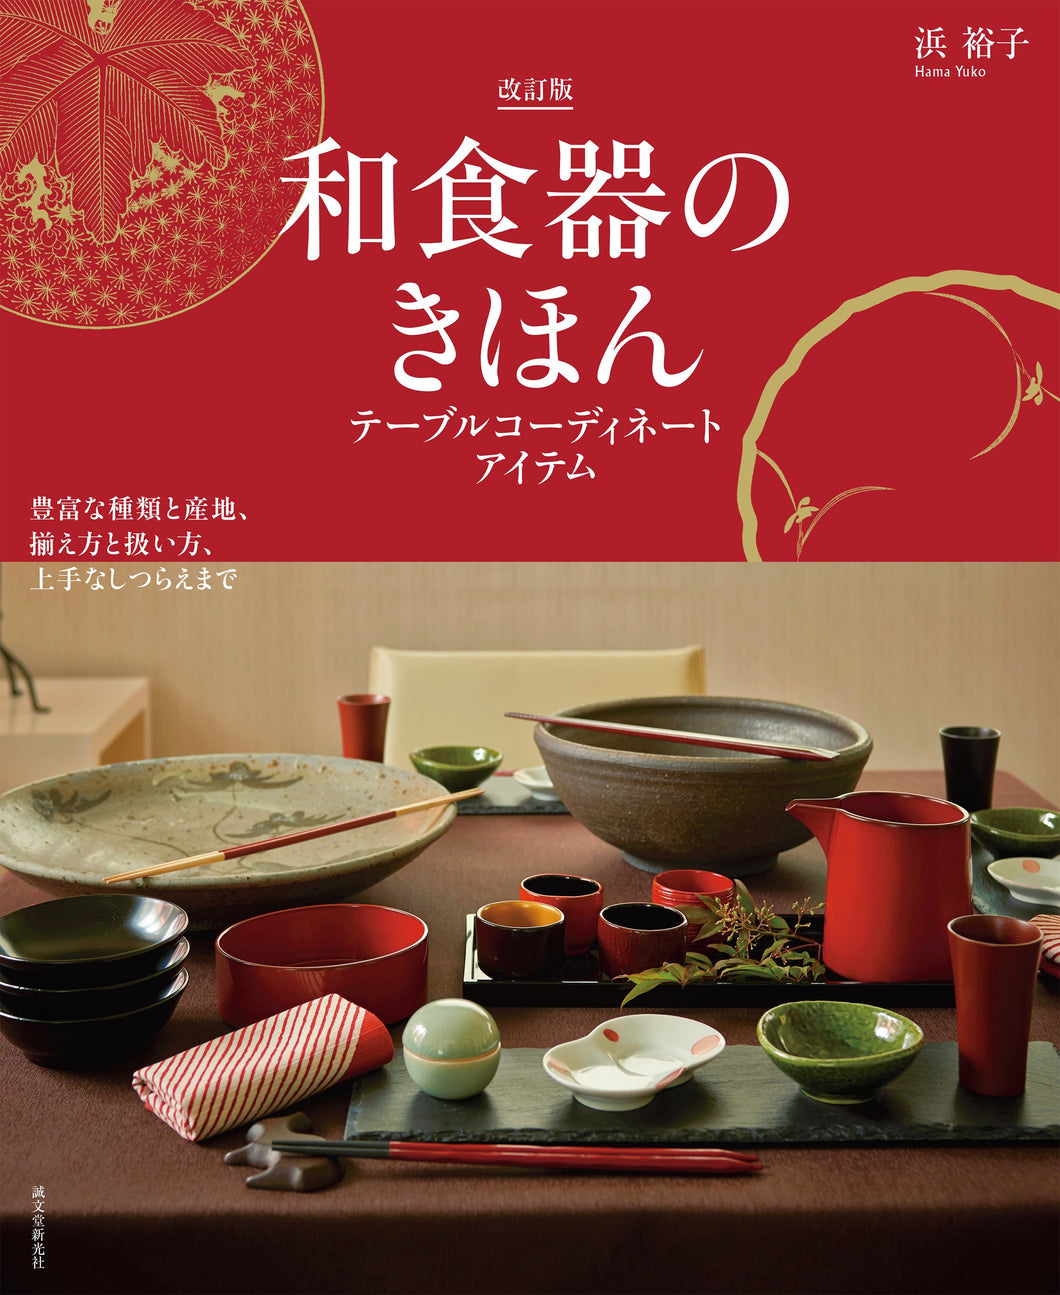 Revised version of the basics of Japanese tableware - Table coordination items